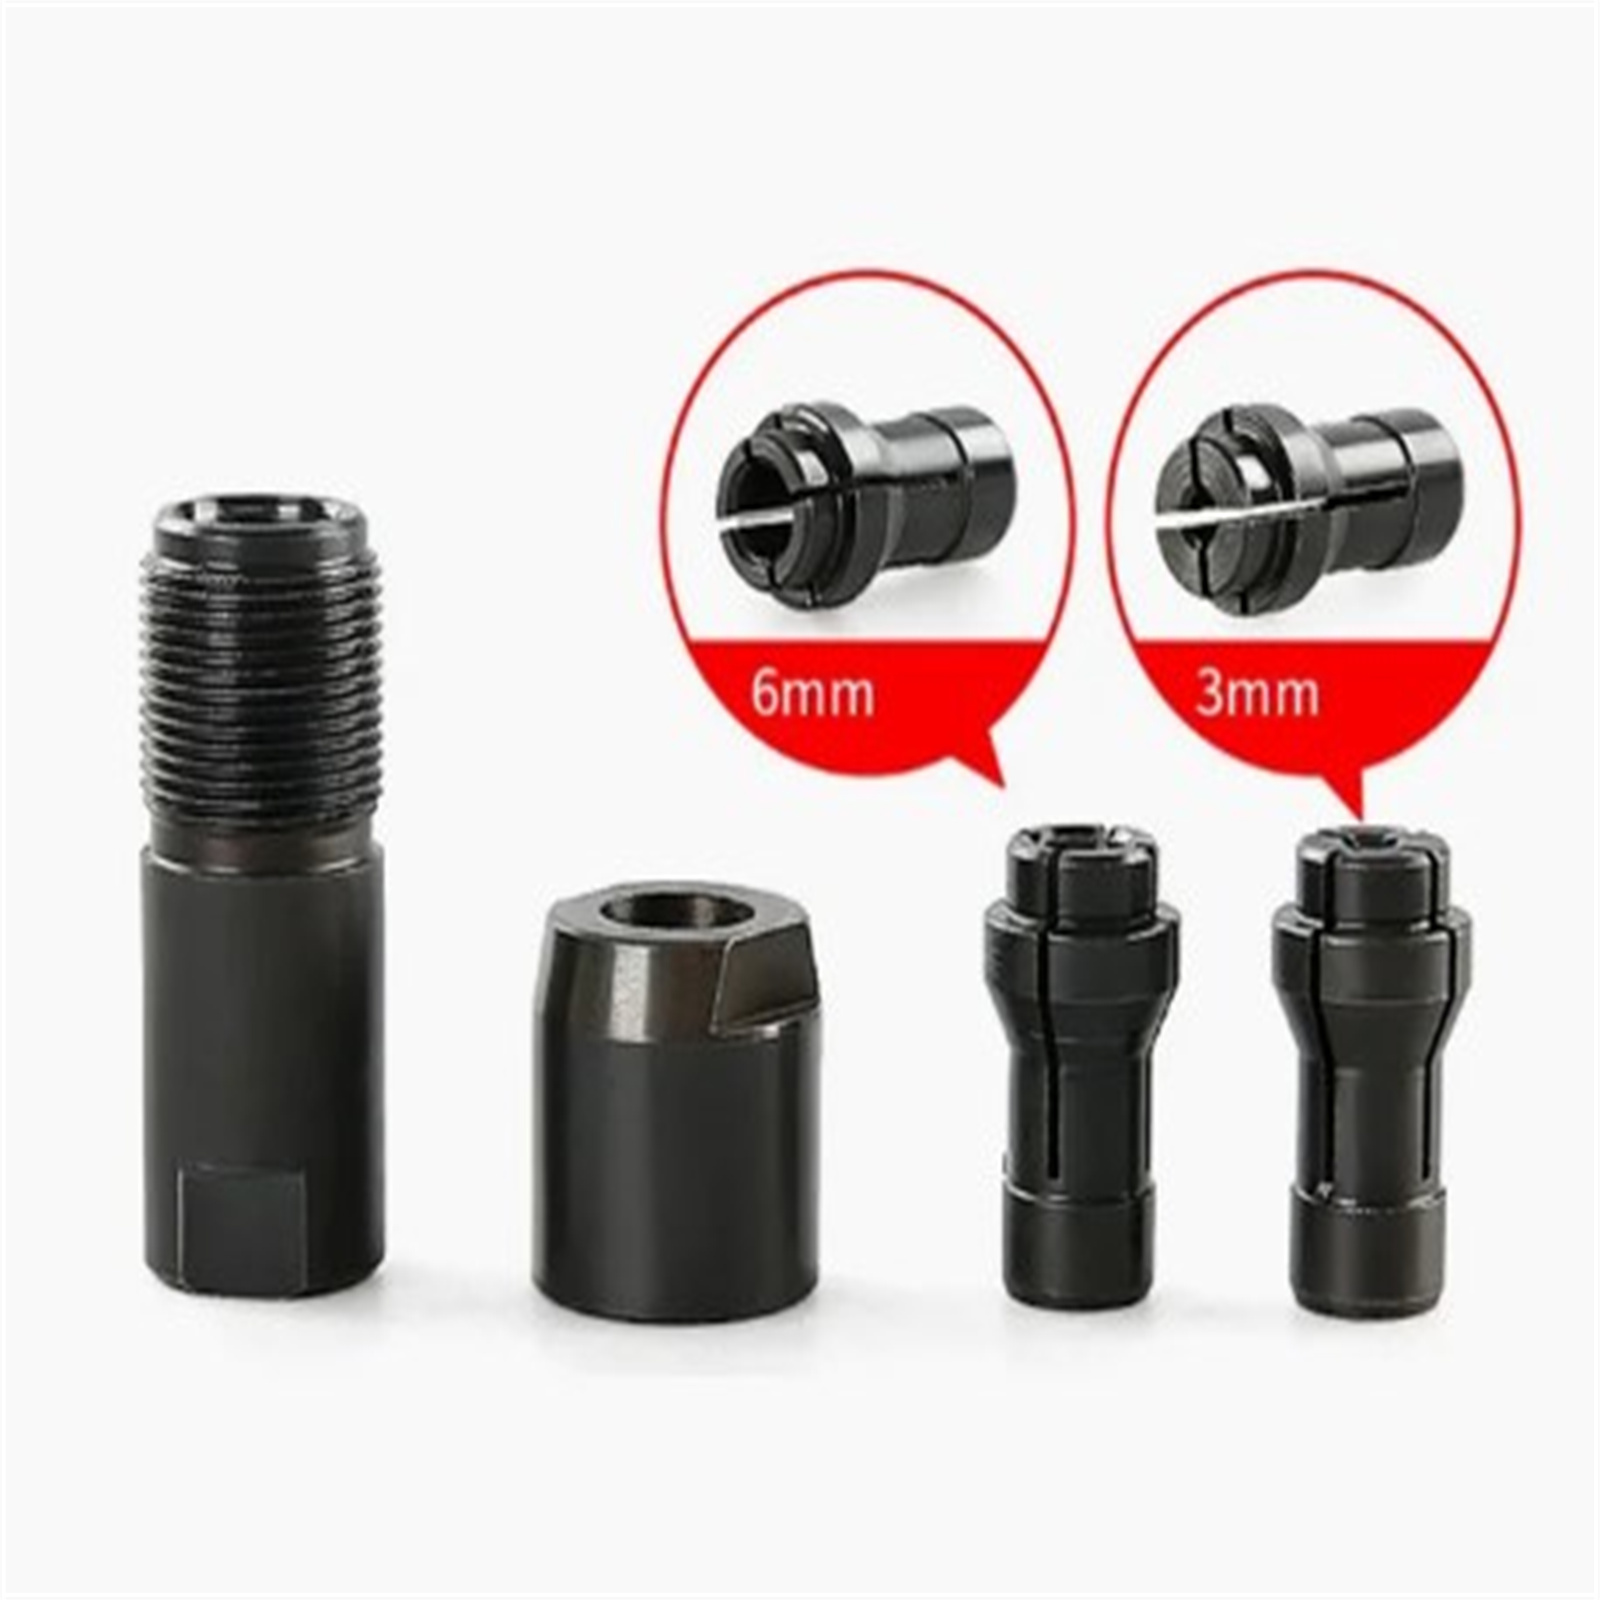 Direct Grinding Conversion Head Modified Adapter To Straight Grinder Chuck For 100-type Angle Grinder